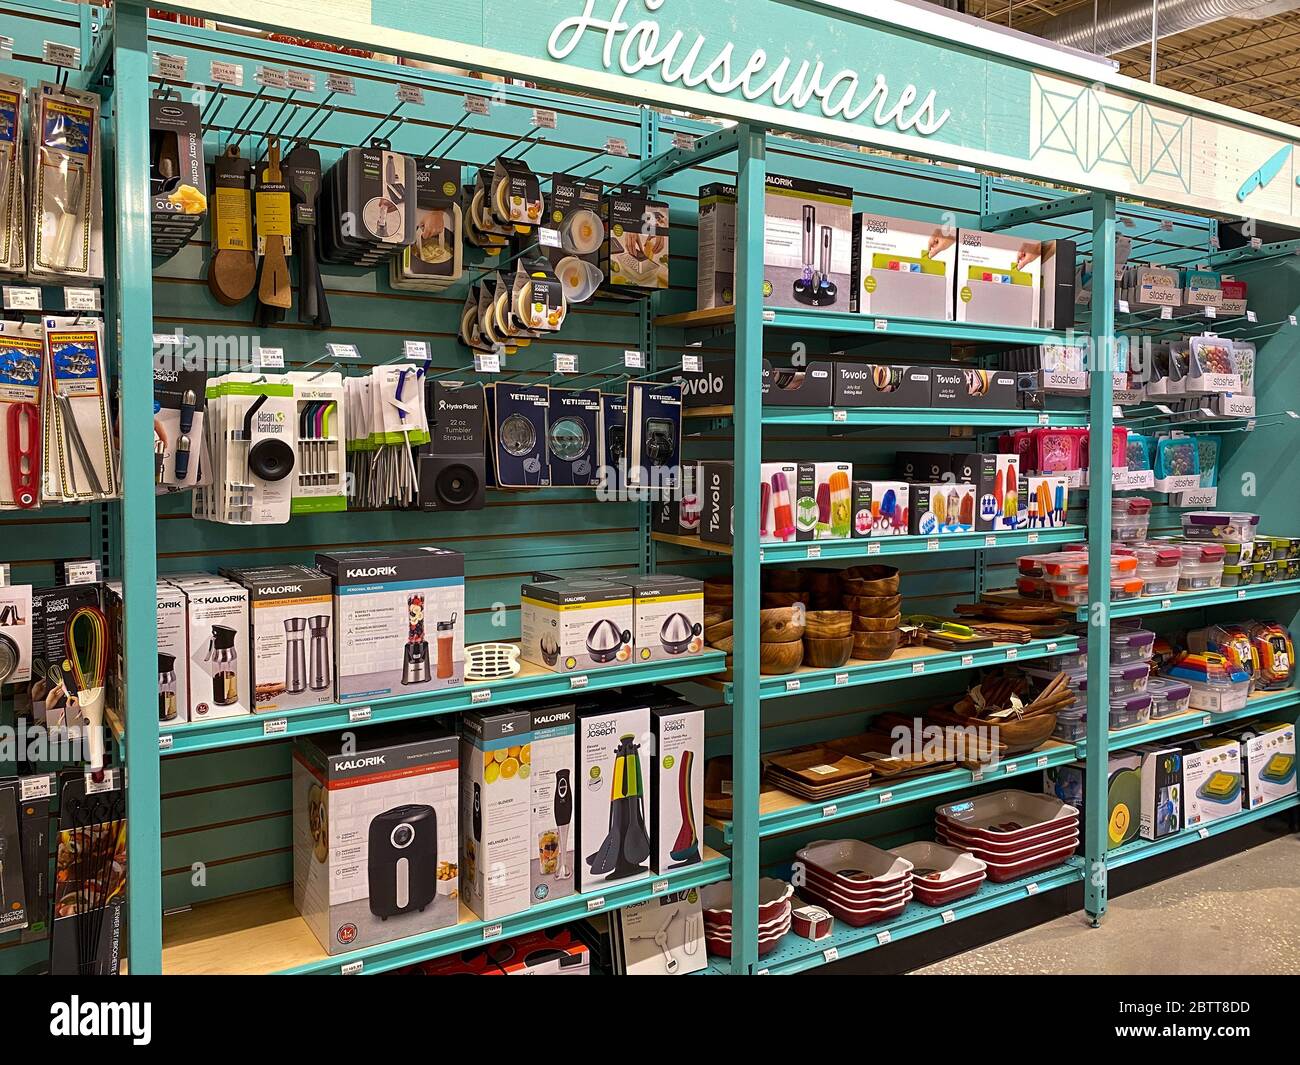 https://c8.alamy.com/comp/2BTT8DD/orlando-flusa-5320-a-display-of-houseware-products-at-a-whole-foods-market-grocery-store-2BTT8DD.jpg